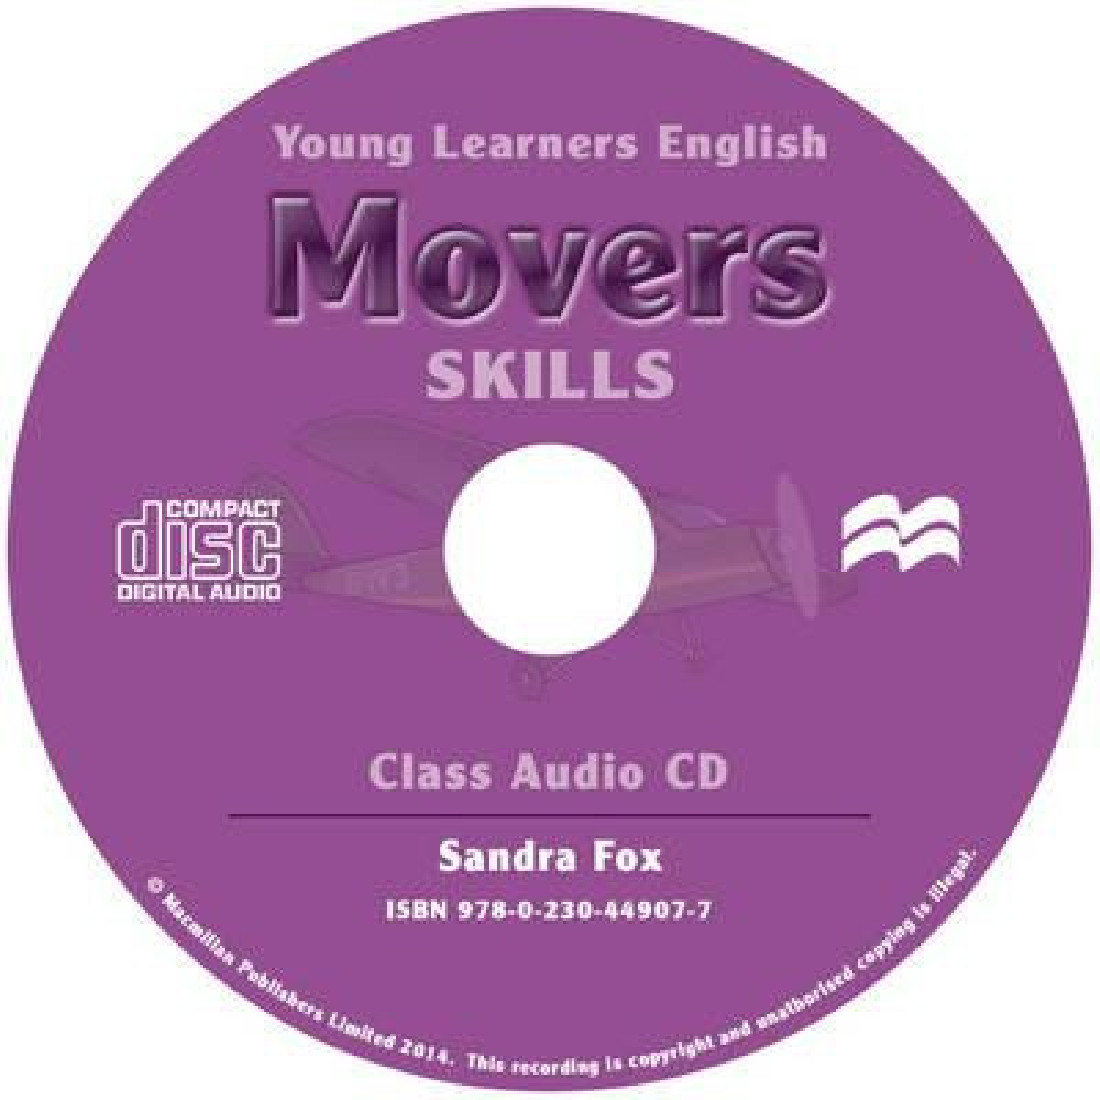 YOUNG LEARNERS ENGLISH SKILLS MOVERS CD AUDIO CLASS (2)